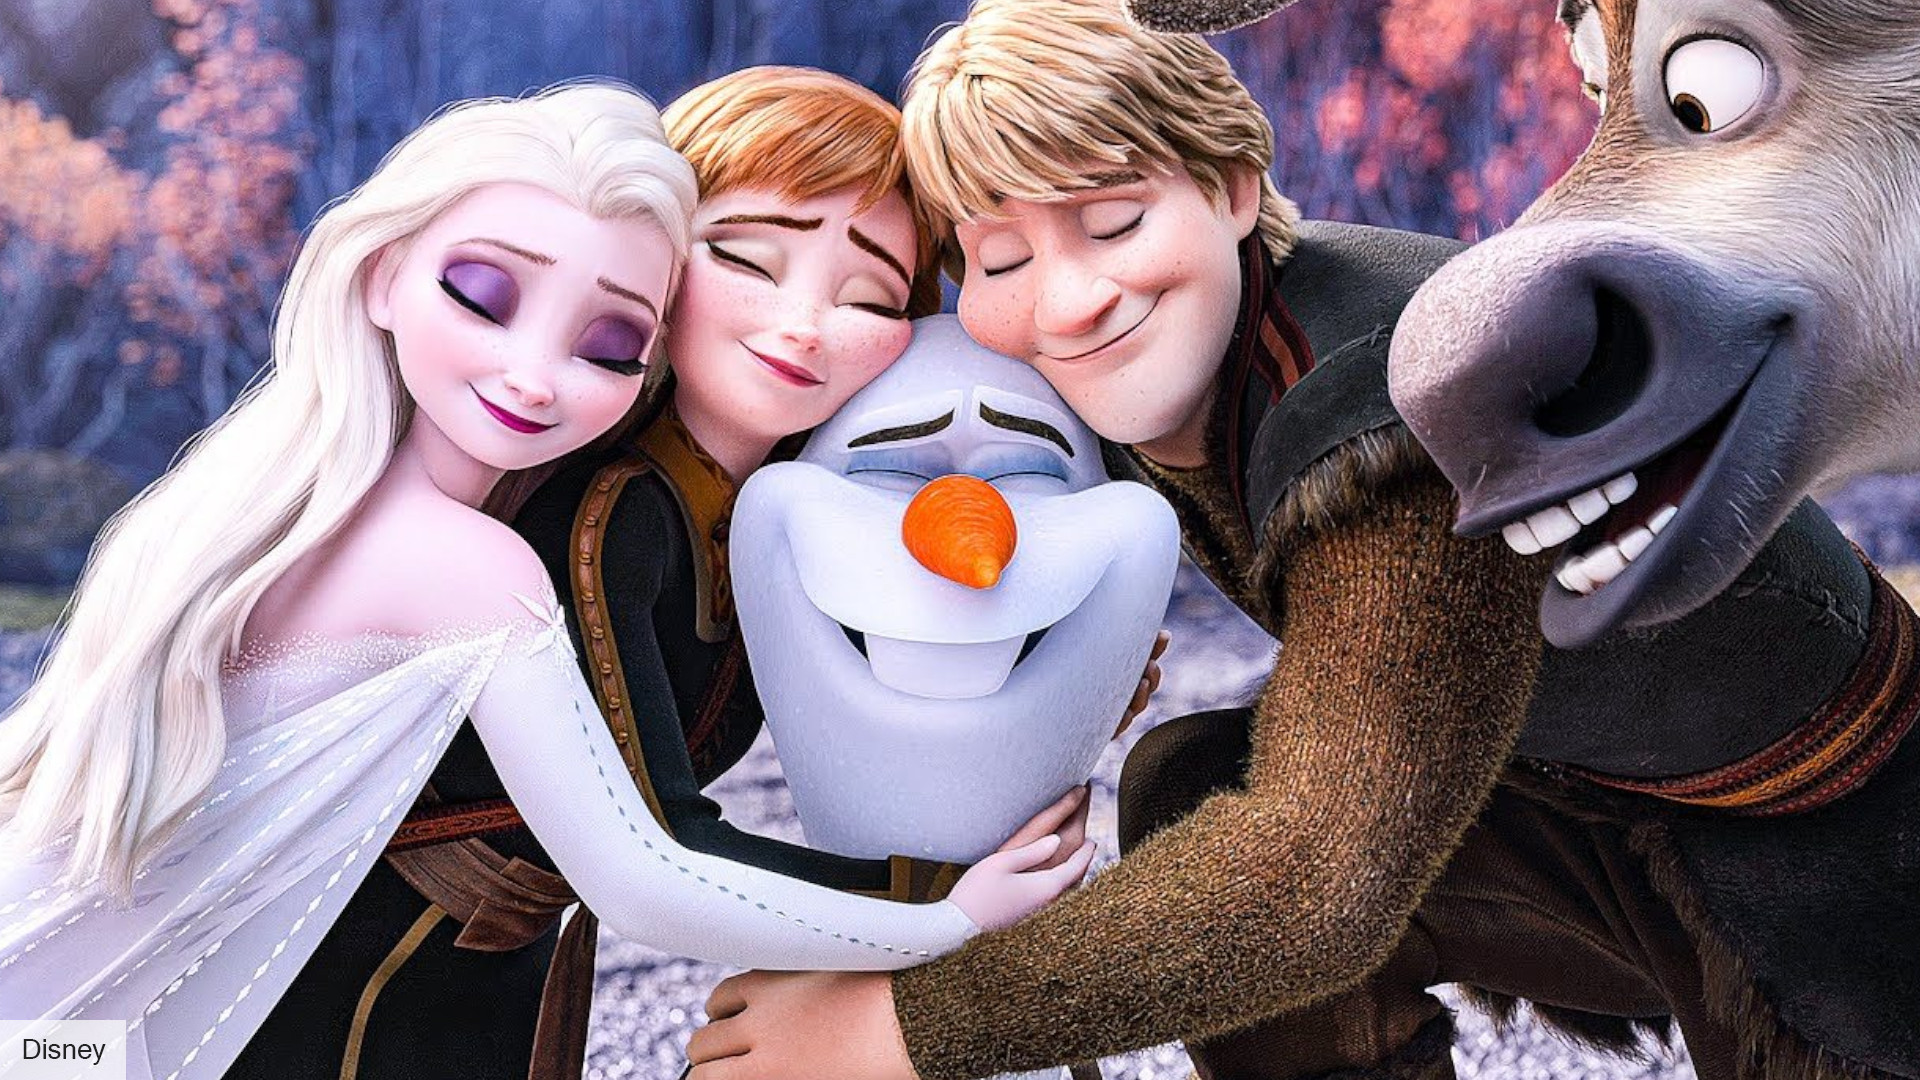 Frozen 3': Info & Details For The New Movie